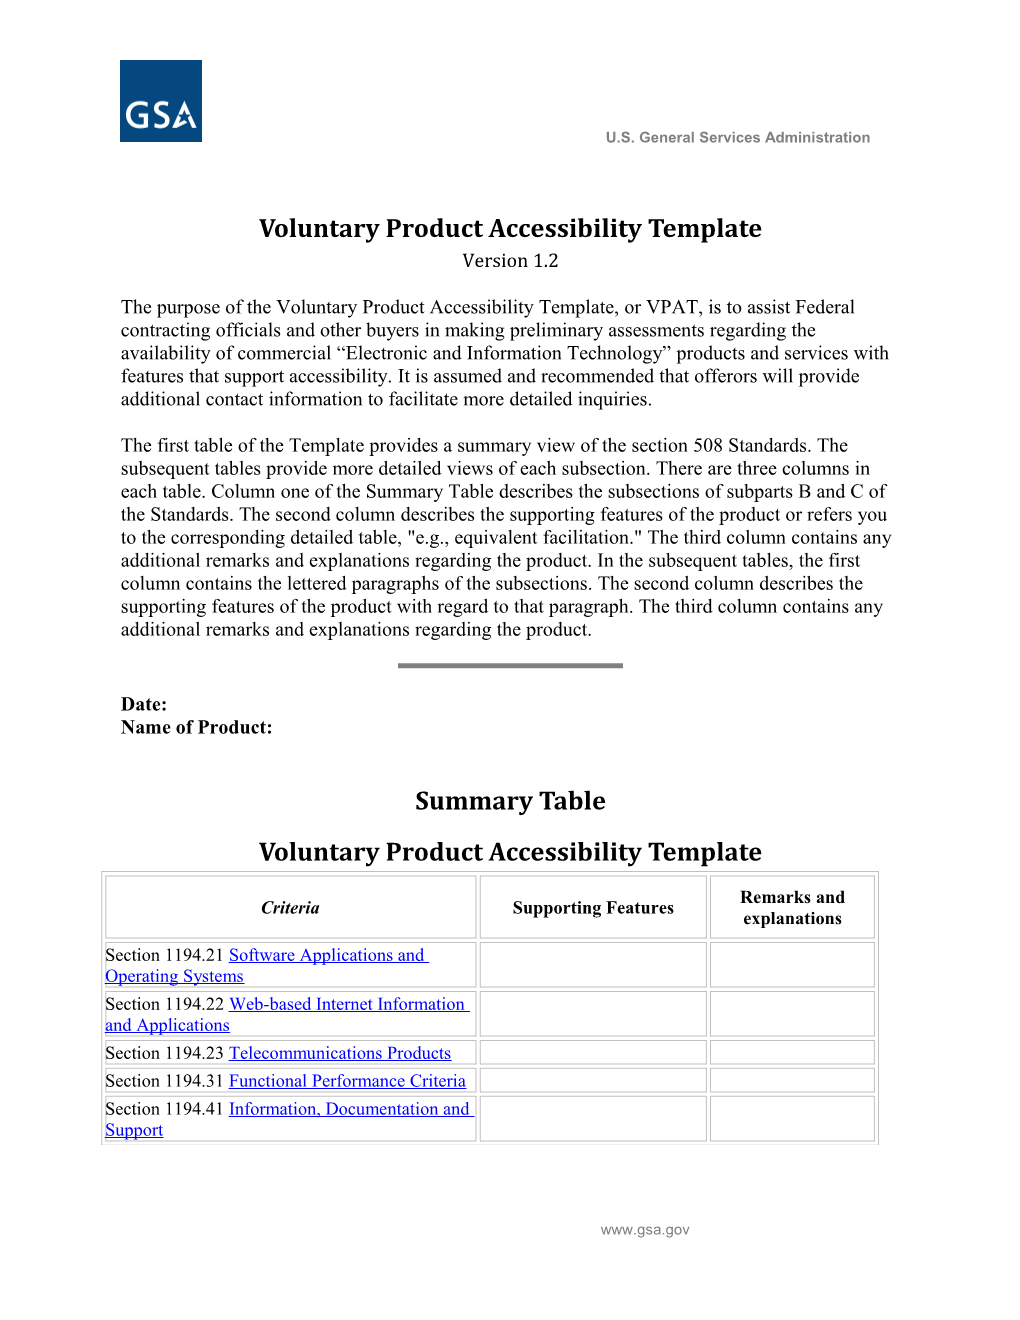 Voluntary Product Accessibility Template s2